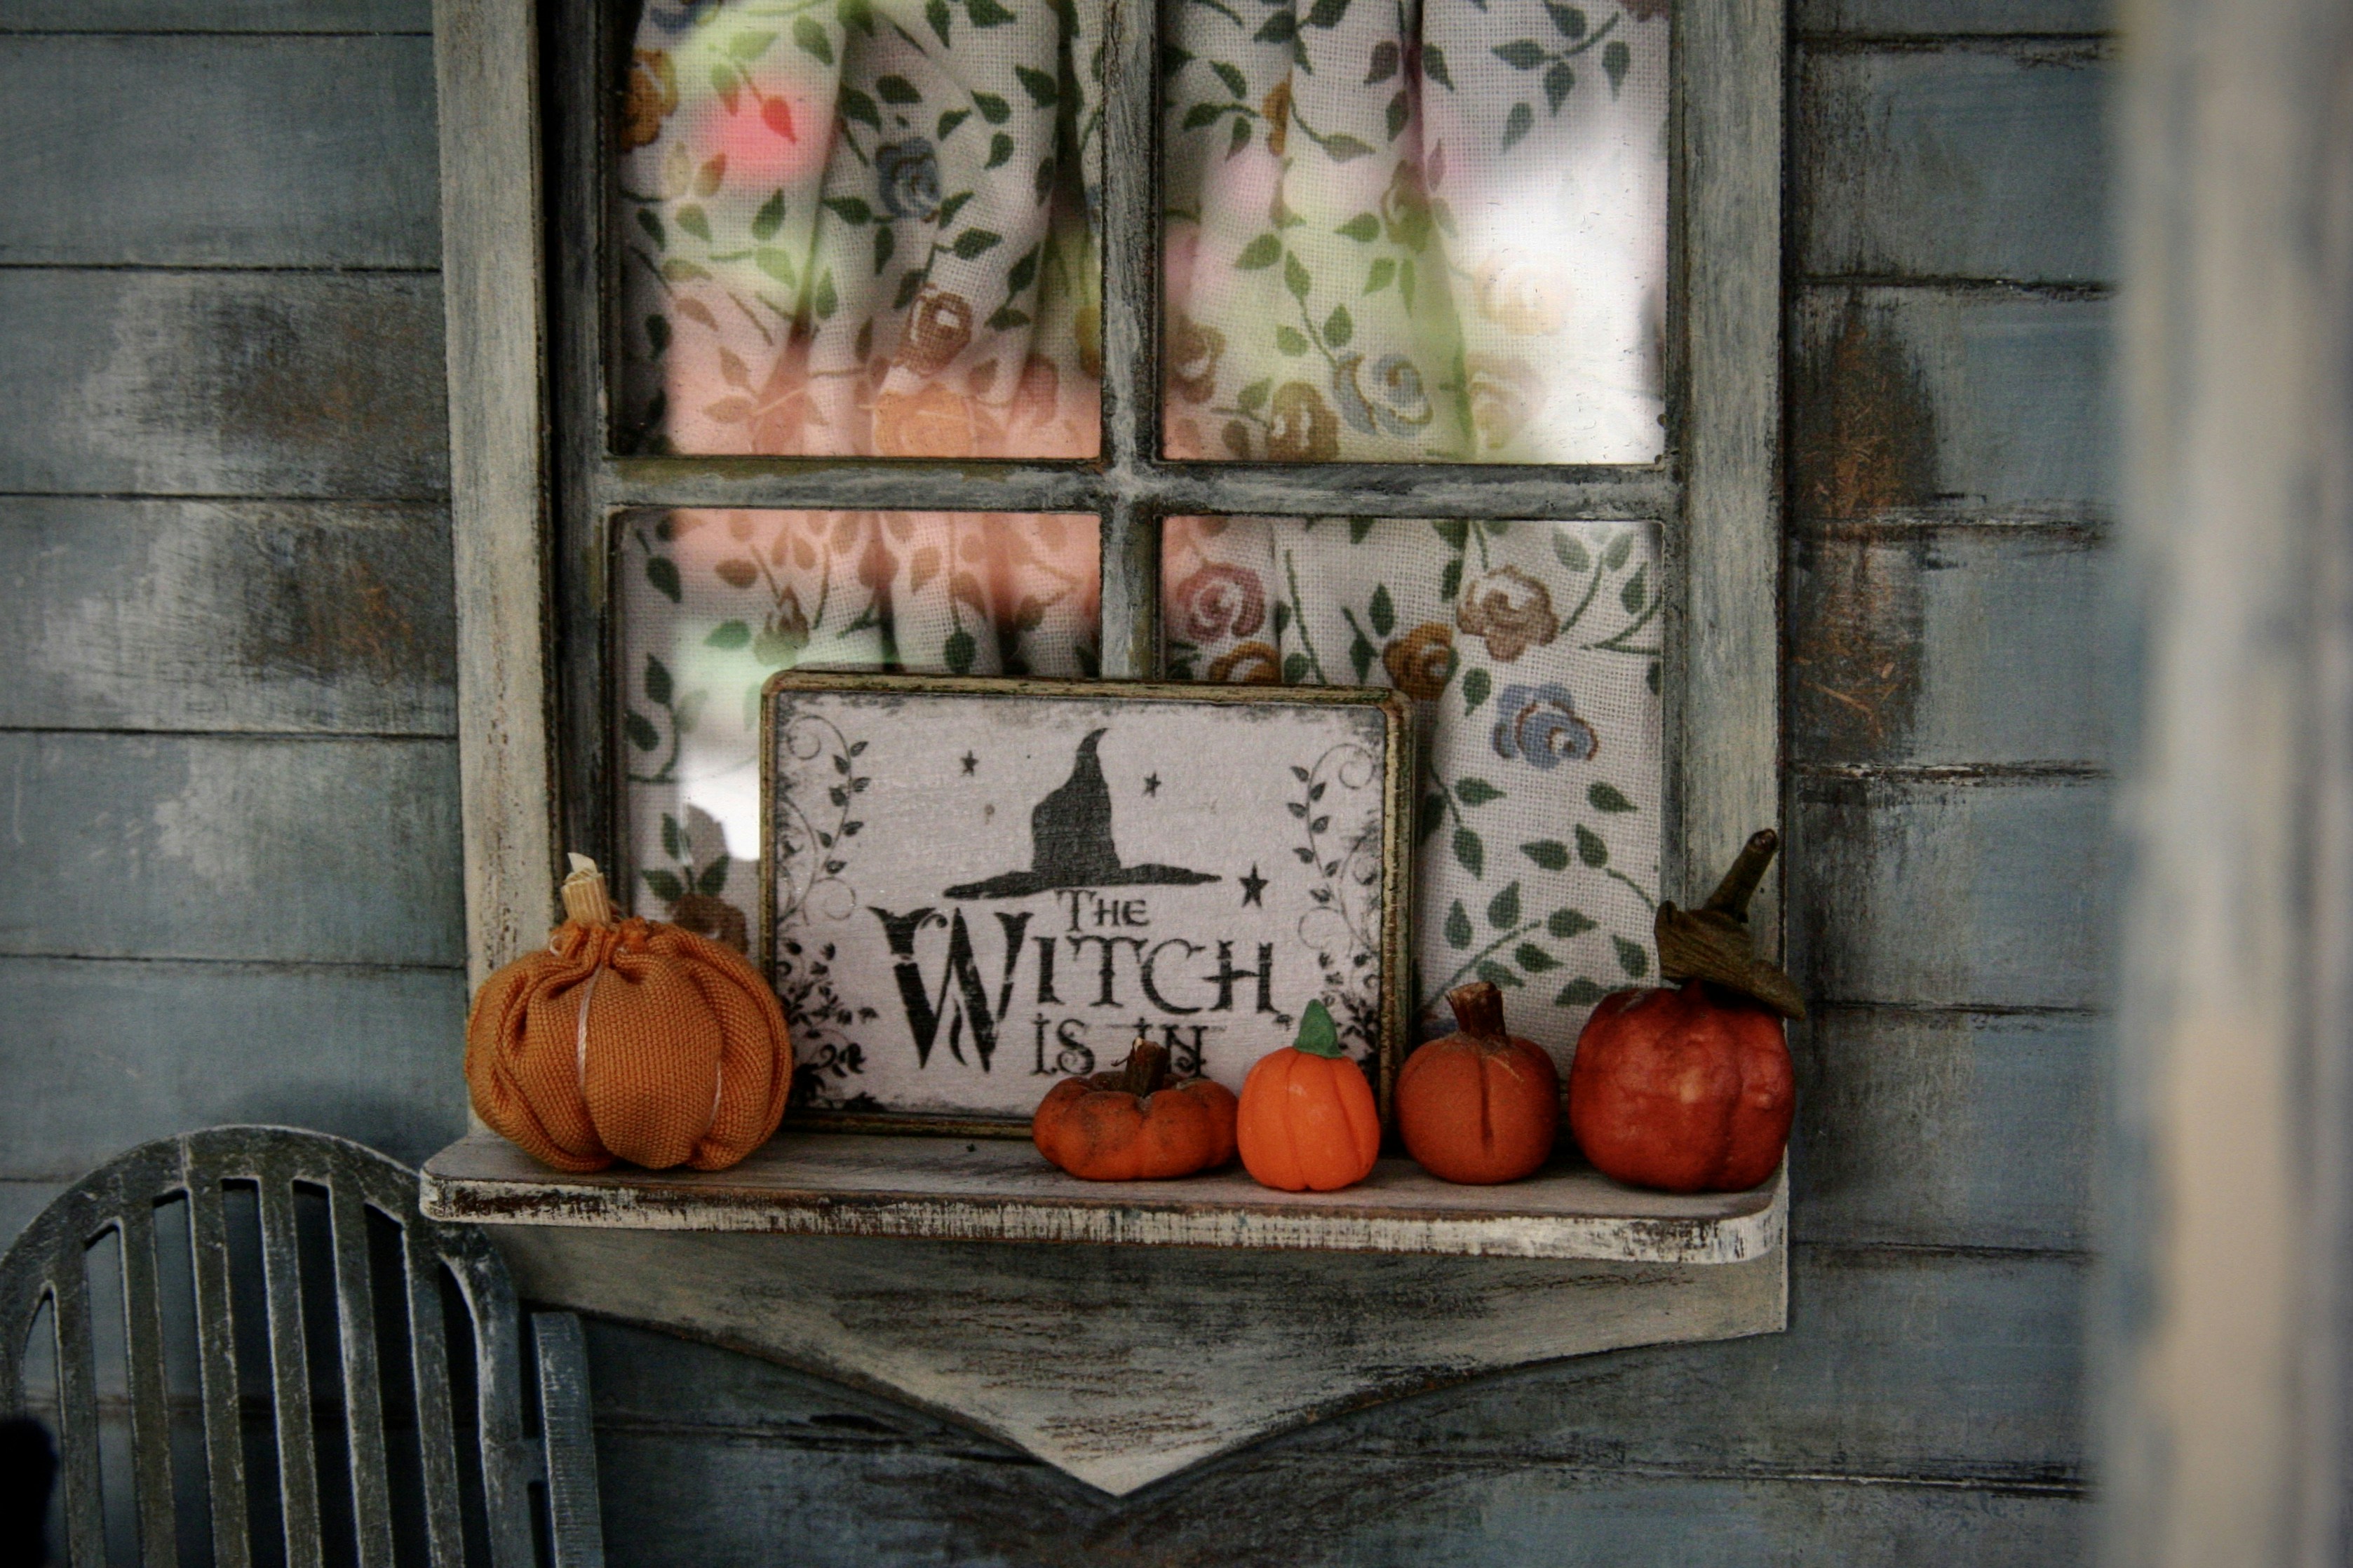 I built a little veranda for my mice and gave it to my little mouse witches Caerphilly and Kashta. This is part of their Halloween decoration.